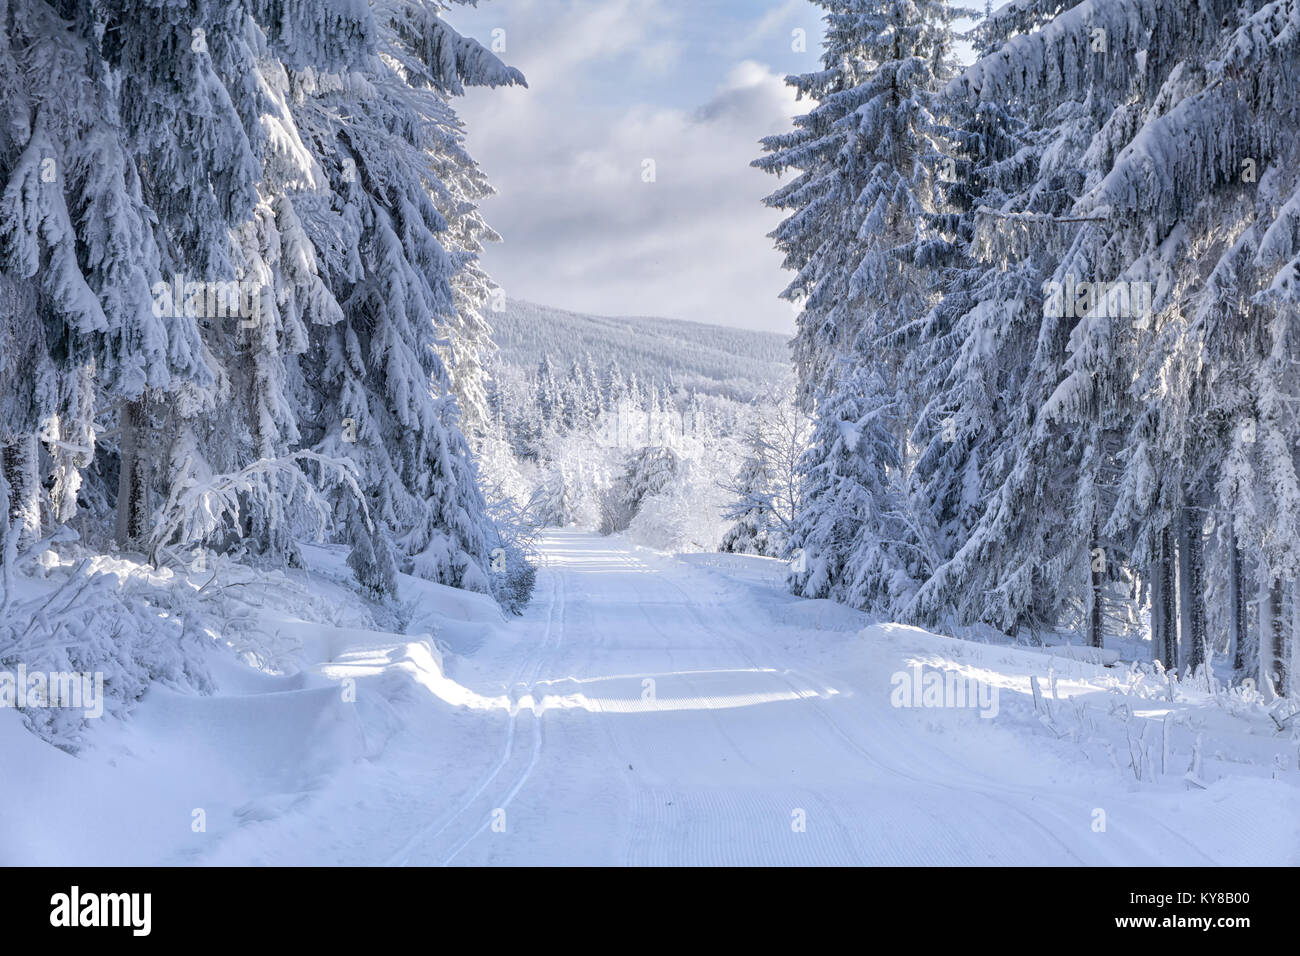 Groomed ski trail in sunny winter day on mountains road. Trees covered with hoarfrost and fresh snow illuminated by the sun, clouds on the blue sky. Stock Photo